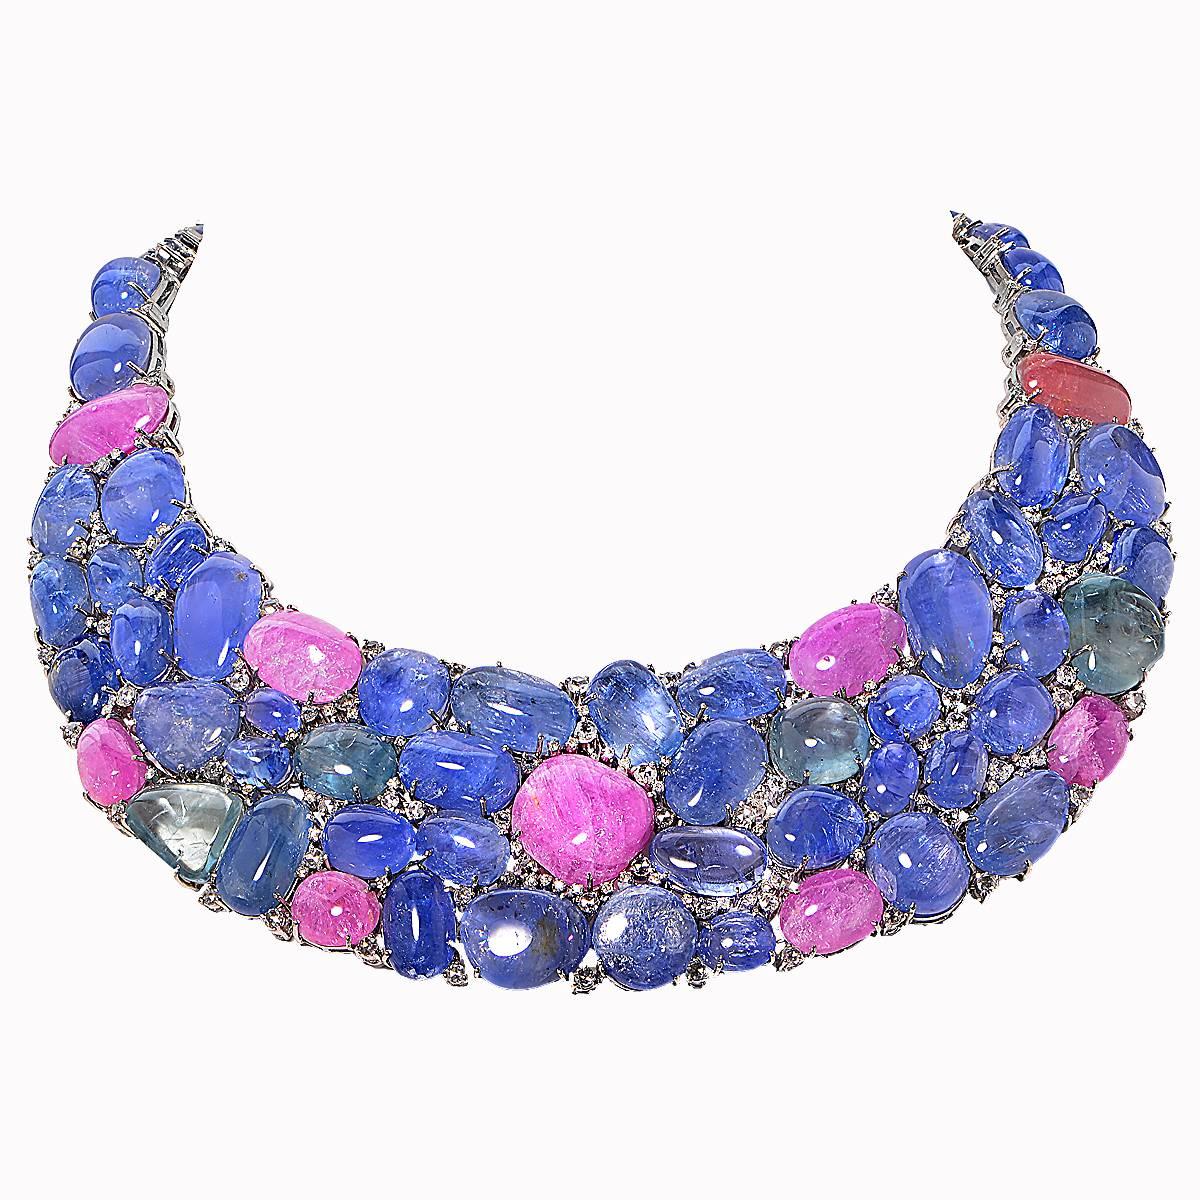 18 Karat White Gold Necklace Set with Approximately 768 Carat of Blue Sapphire and 6.25 Carats of Round Brilliant Cut Diamonds, G Color, VS Clarity.

Measurement: 15 inch in Length

This Gorgeous Necklace is Accompanied by a Retail Appraisal